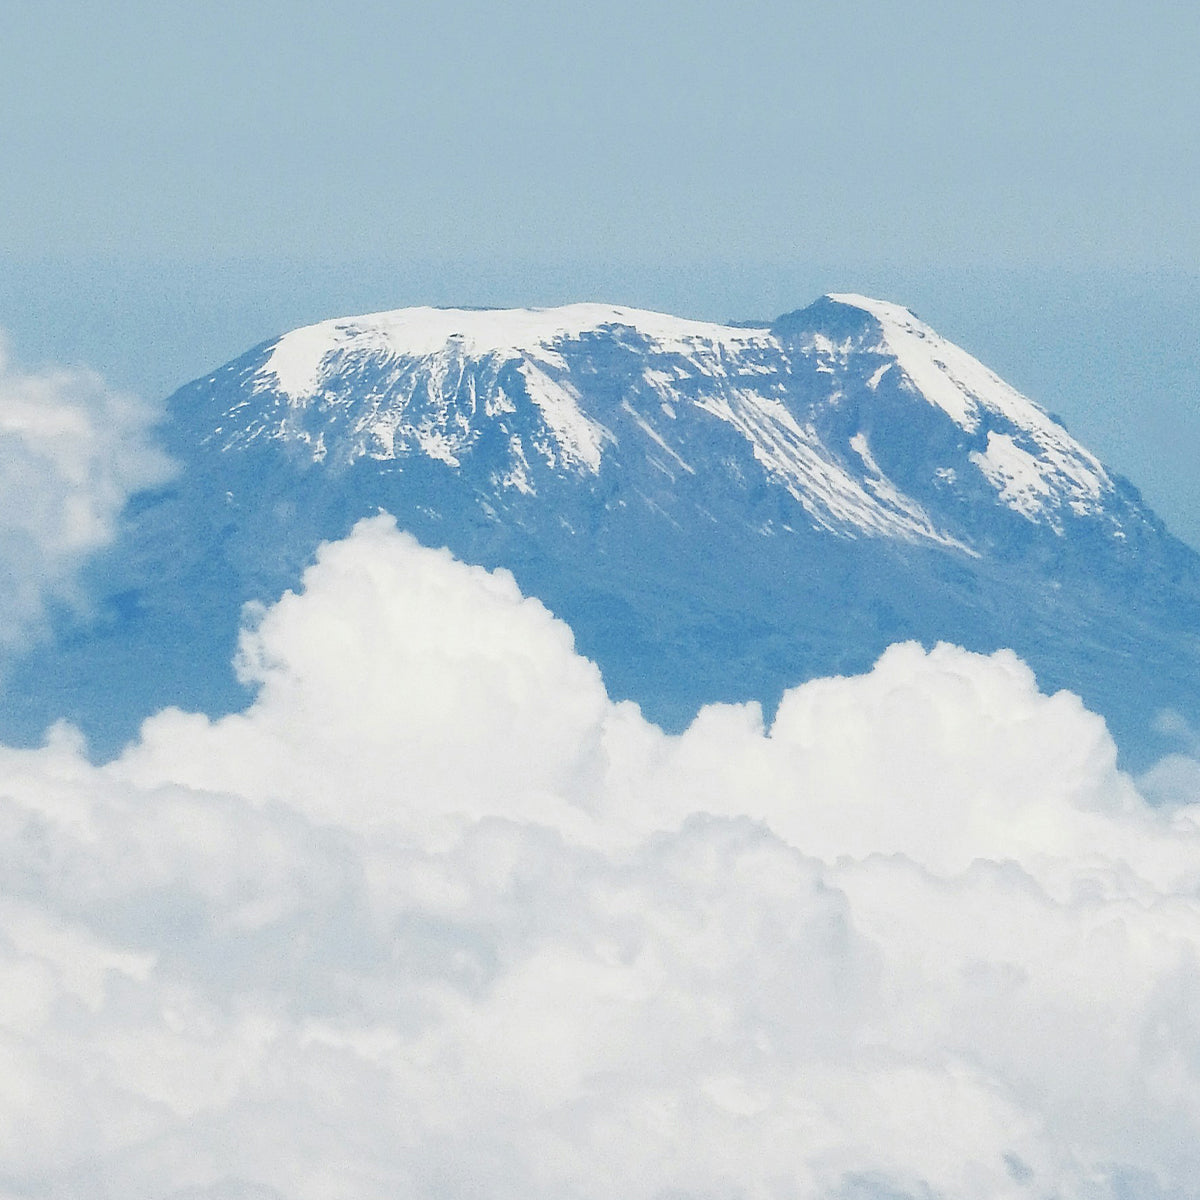 Mount Kilimanjaro with snow on top and surrounded by clouds